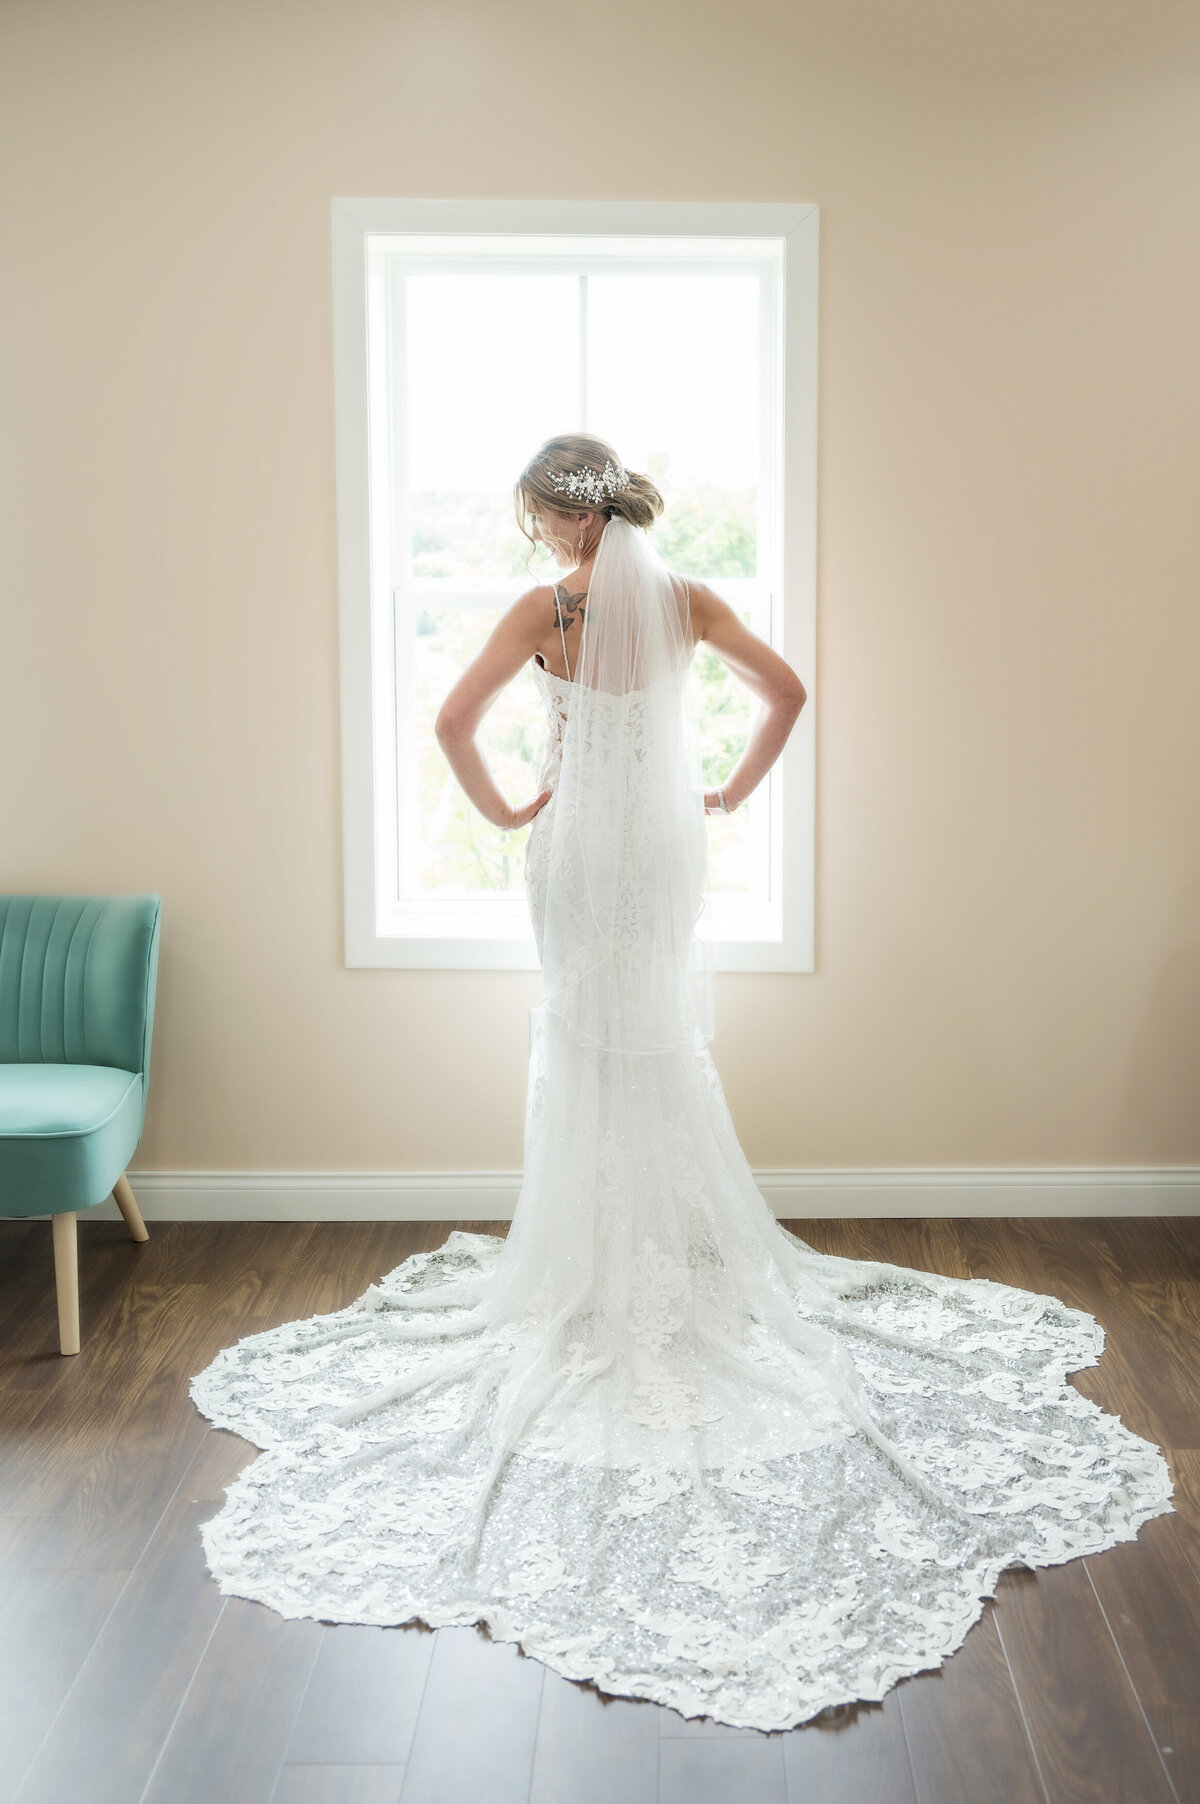 Bride with wedding dress in front of glowing window light.